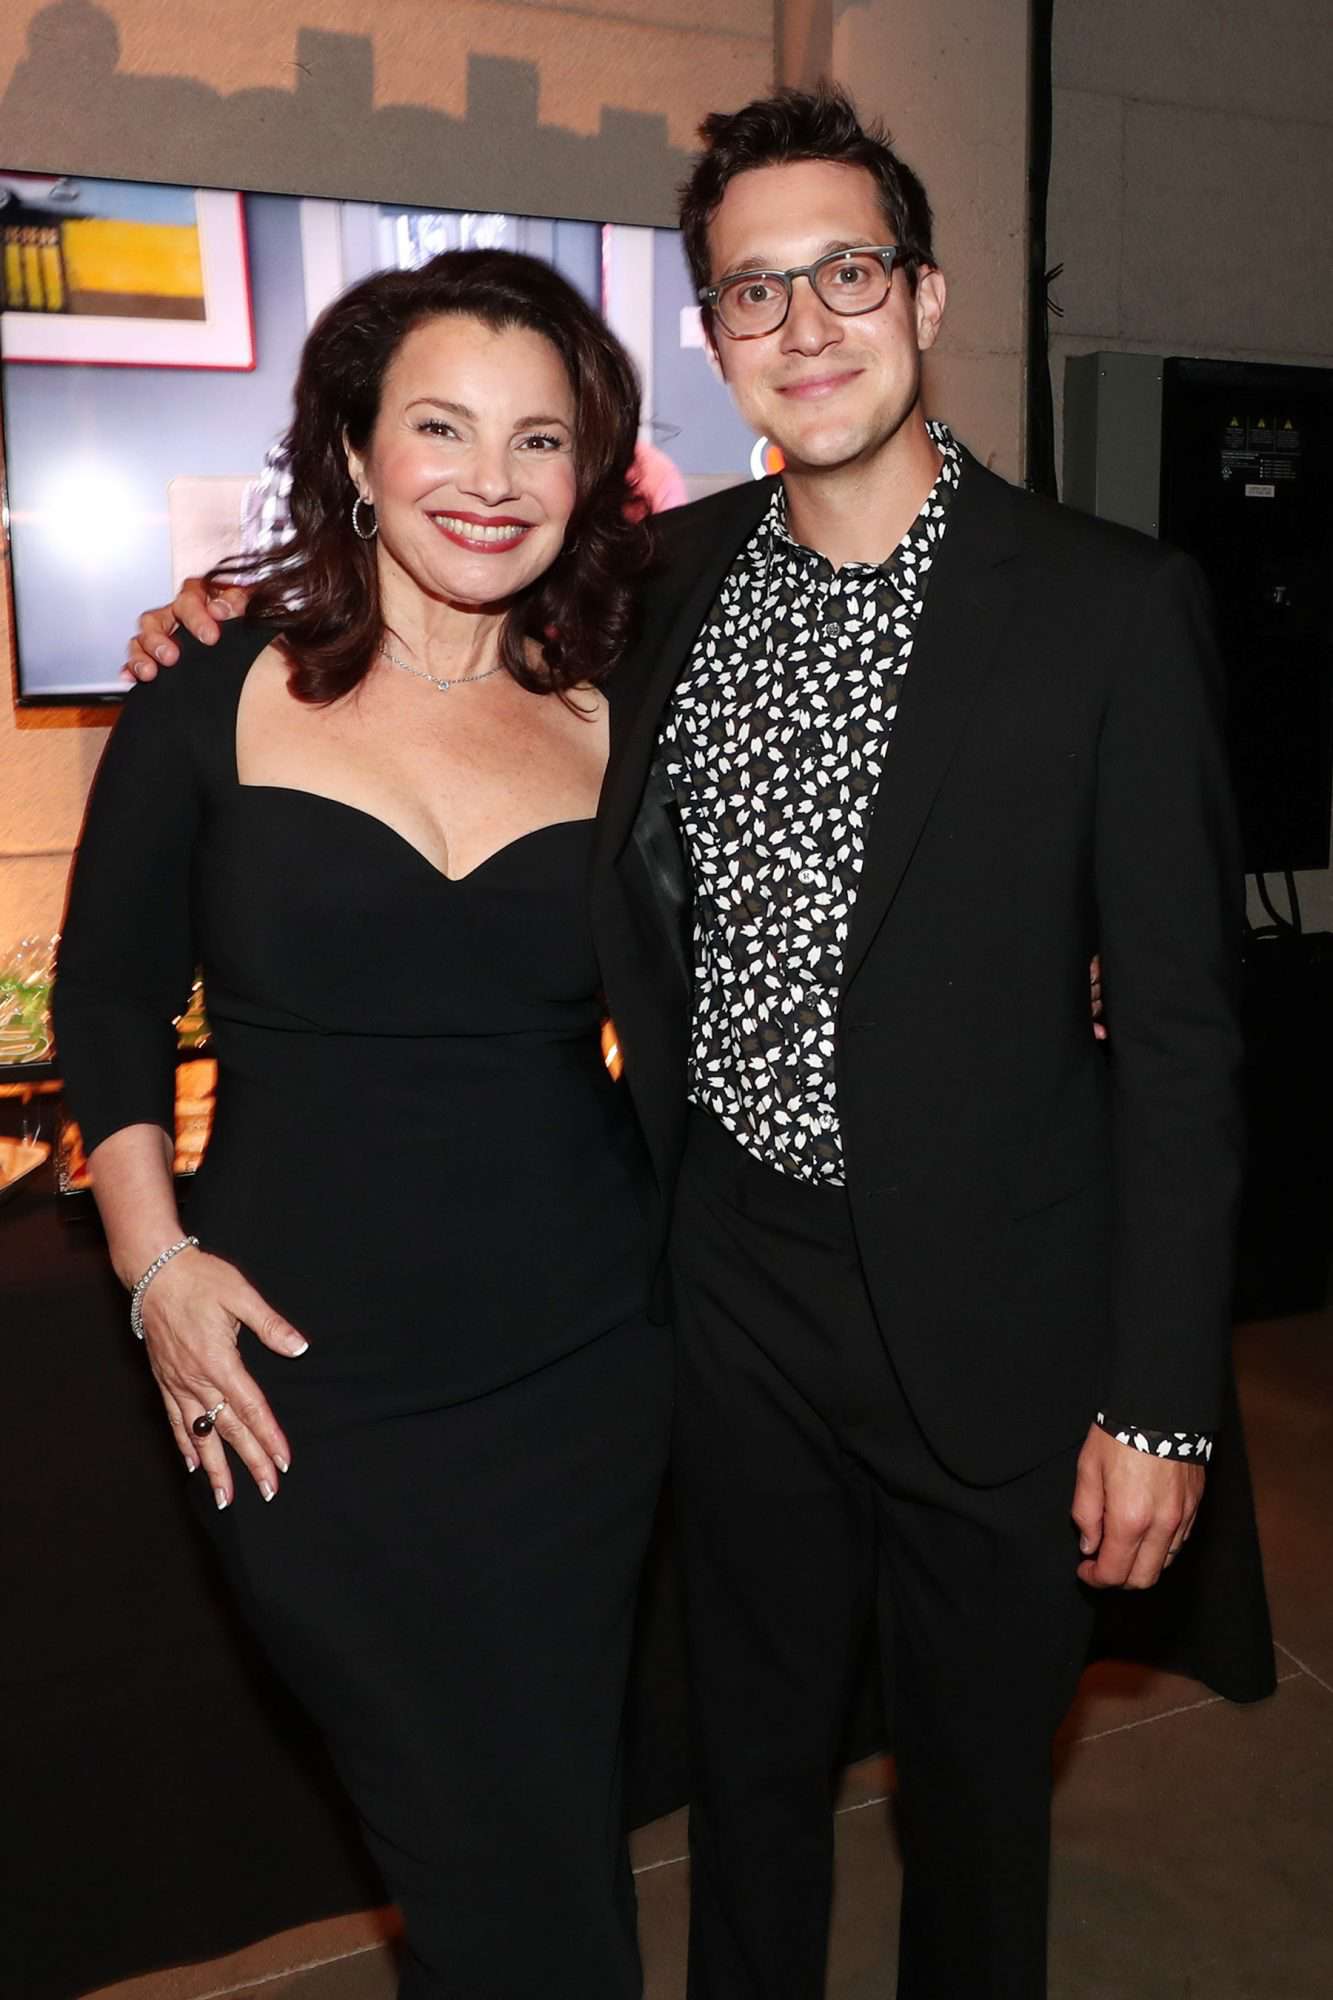 Fran Drescher (Indebted) and executive producer Dan Levy